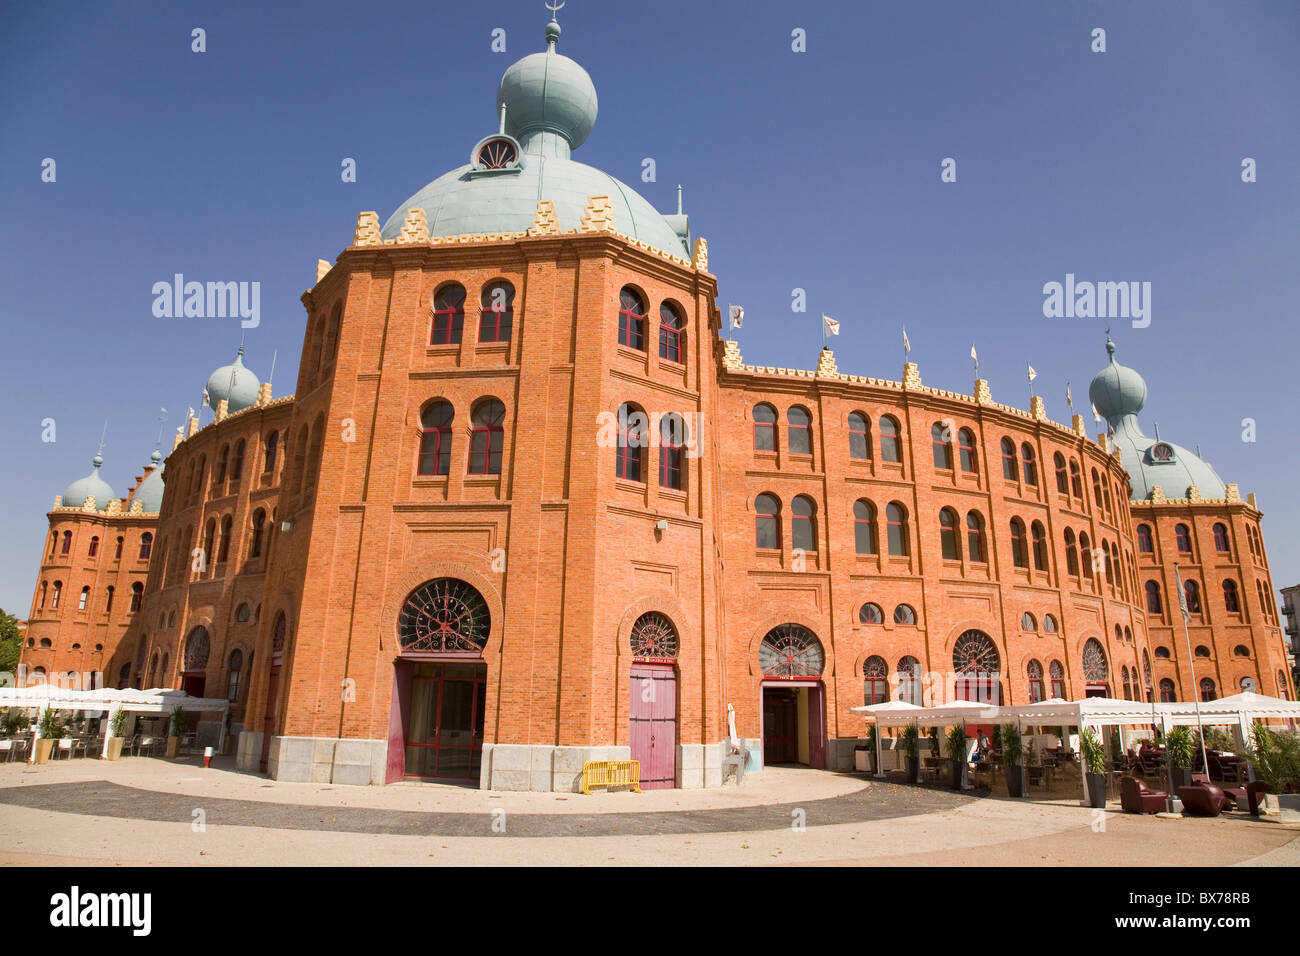 The red brick exterior of the Campo Pequeno bullring in central Lisbon, Portugal, Europe Stock Photo